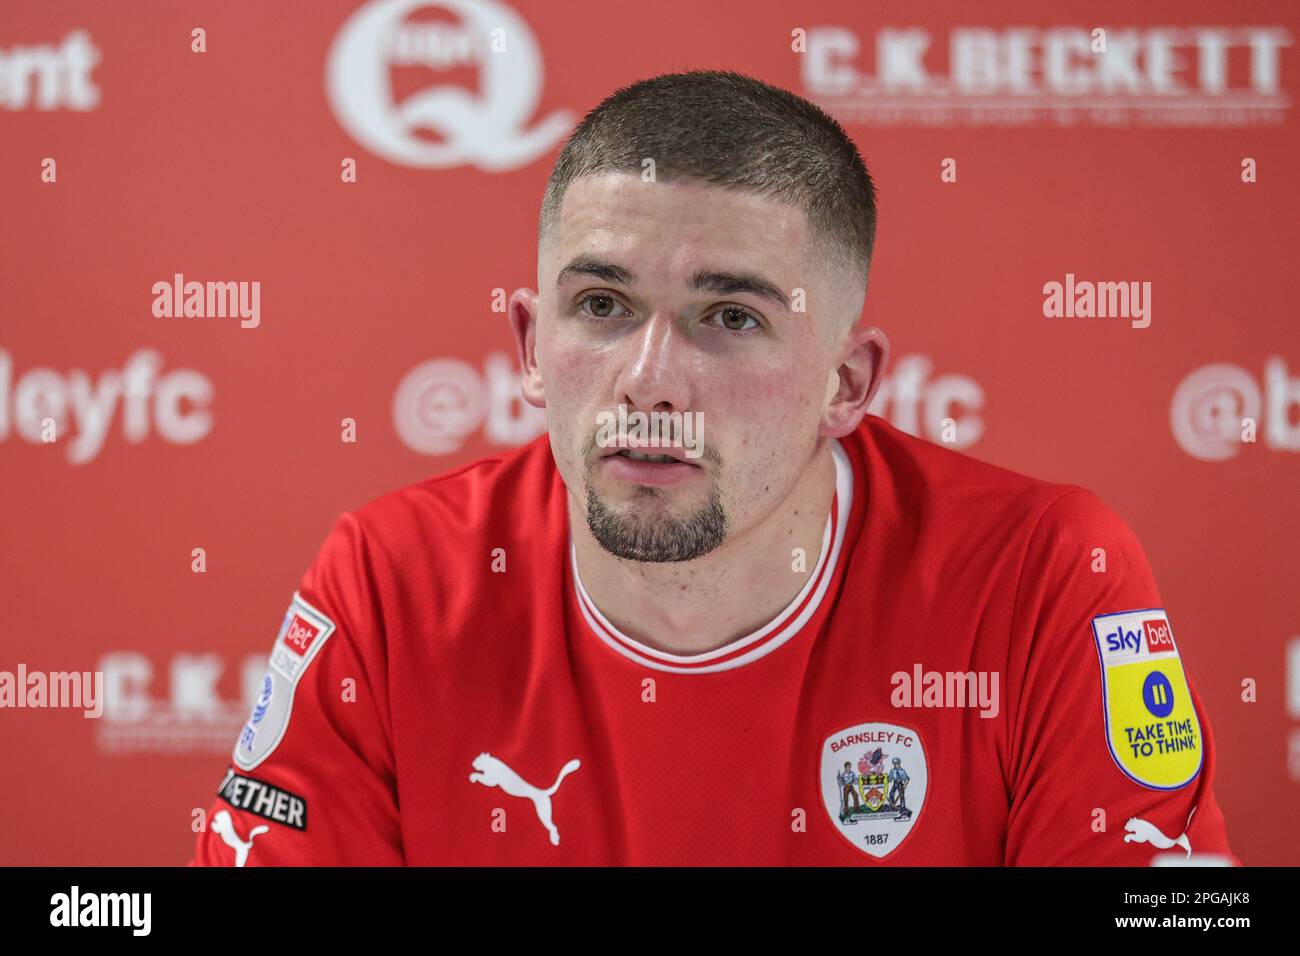 Max Watters #47 of Barnsley speaks in the post match press conference during the Sky Bet League 1 match Barnsley vs Sheffield Wednesday at Oakwell, Barnsley, United Kingdom, 21st March 2023  (Photo by Mark Cosgrove/News Images) Stock Photo